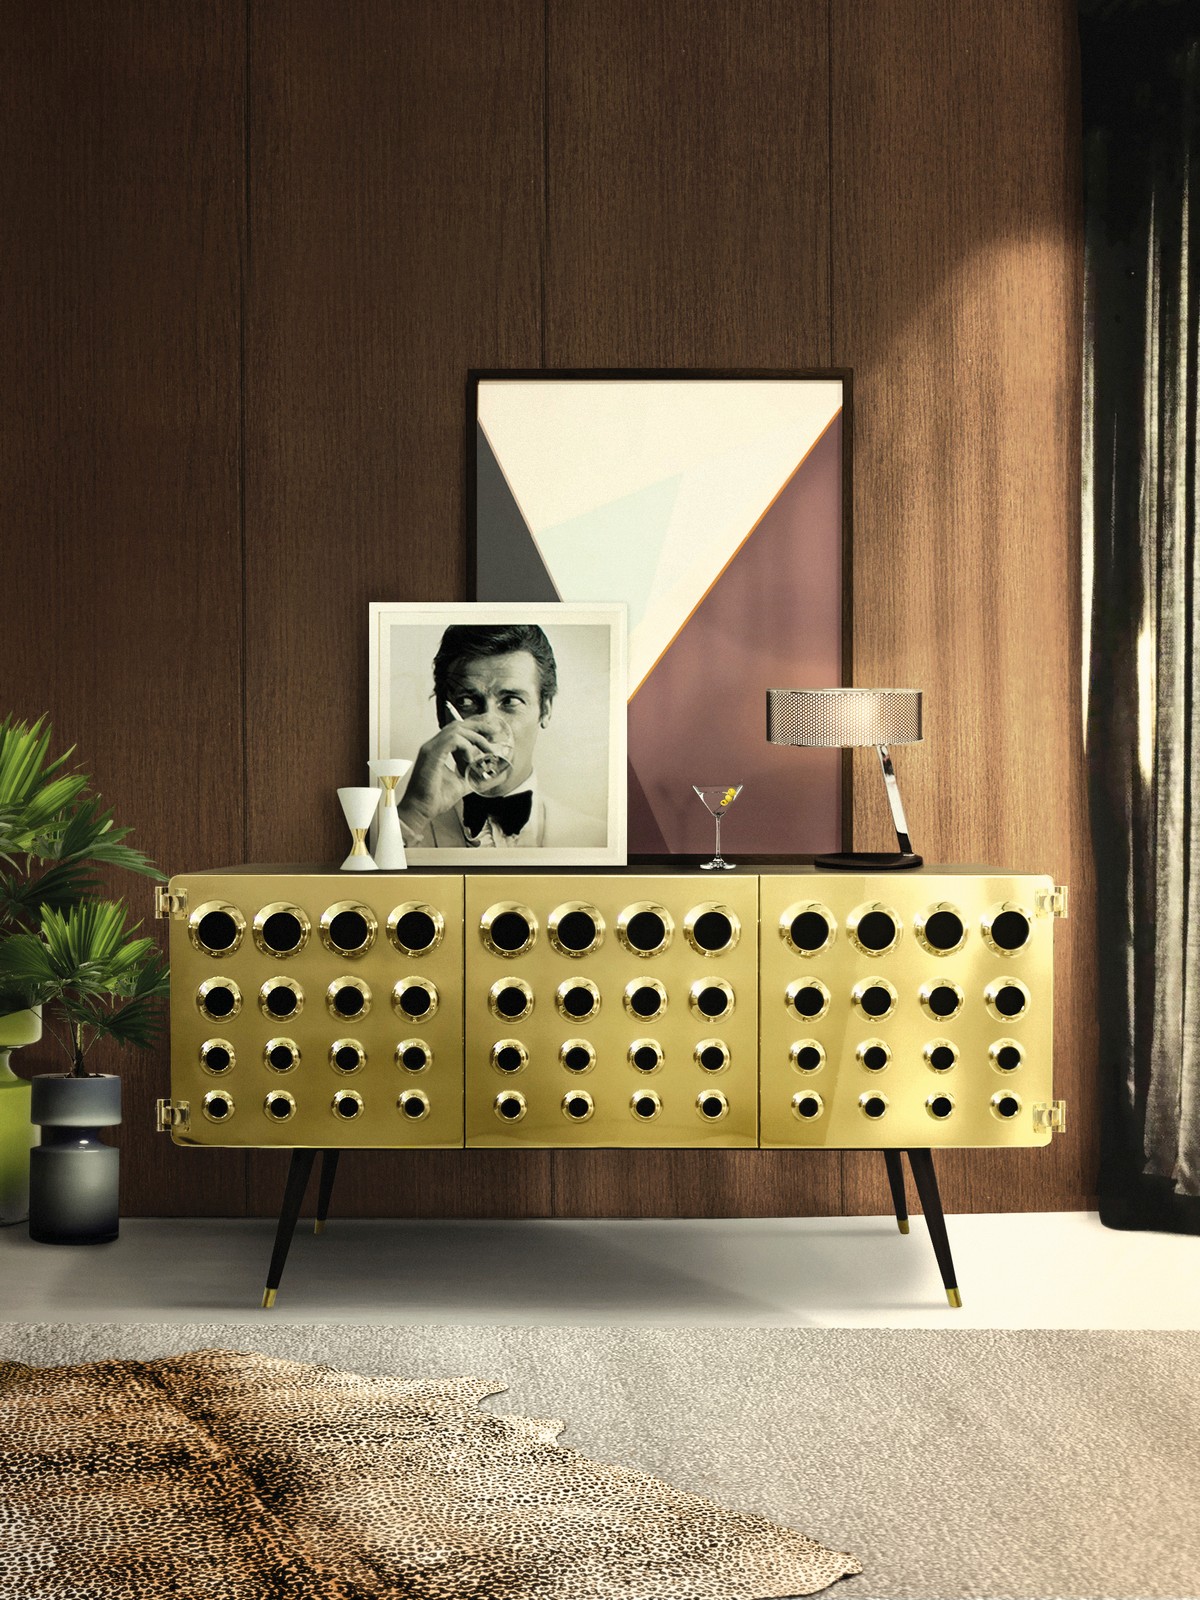 James Bond Lovers We've The Sideboard For You | If you're a big fan of James Bond movies and you're looking for a unique and elegant piece to complete your home decor. #interiordesign #deisgnideas #homedecor #decoration #sideboards #sideboarddesign